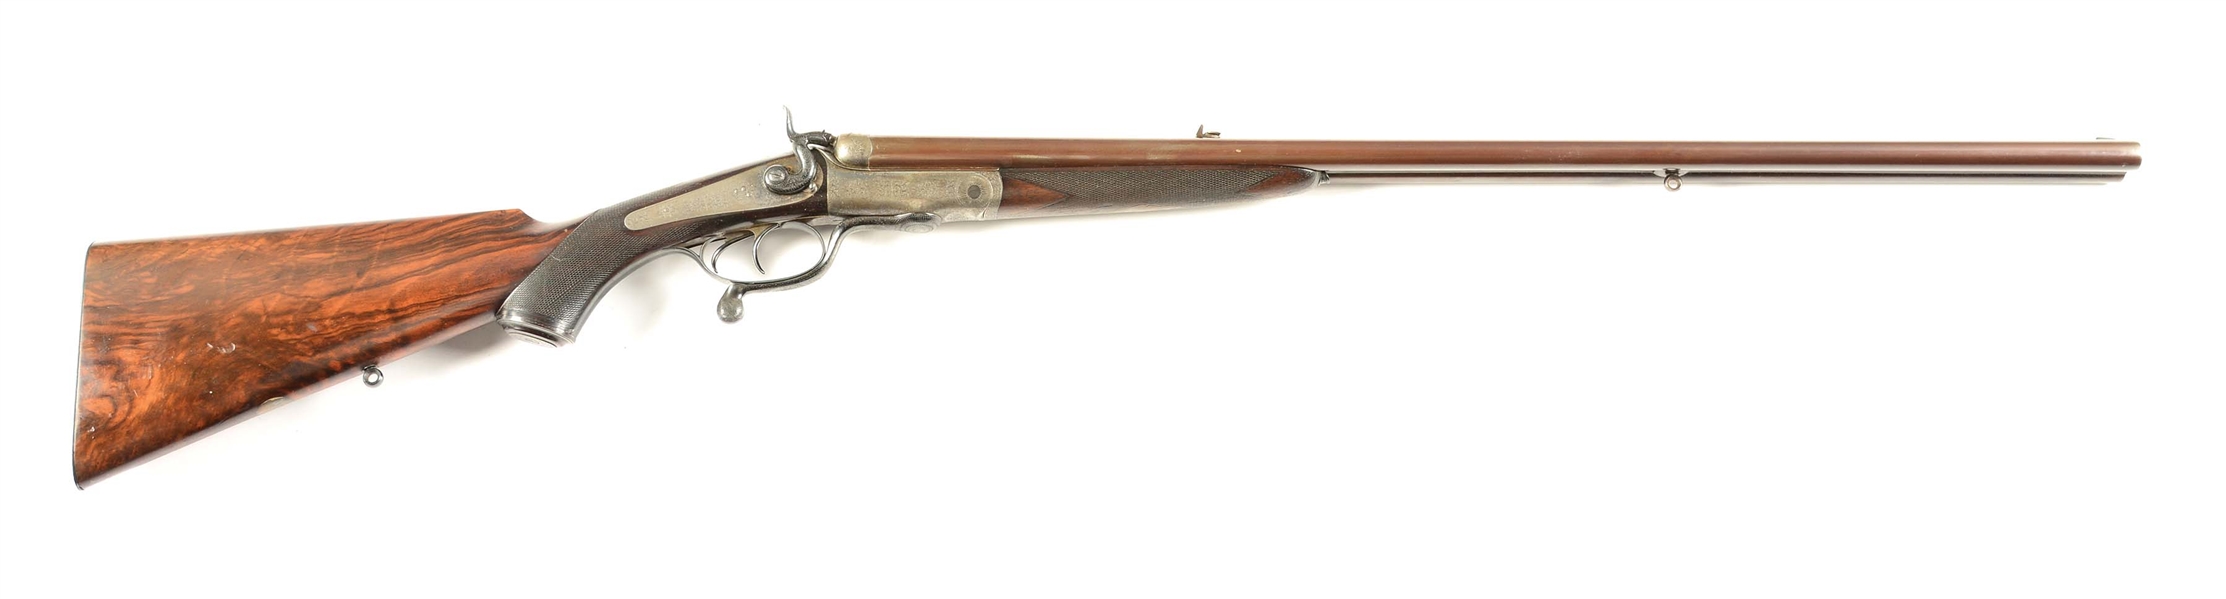 (A) PURDEY HAMMER FIRED DOUBLE RIFLE IN AN UNKNOWN .450 CARTRIDGE (1879).